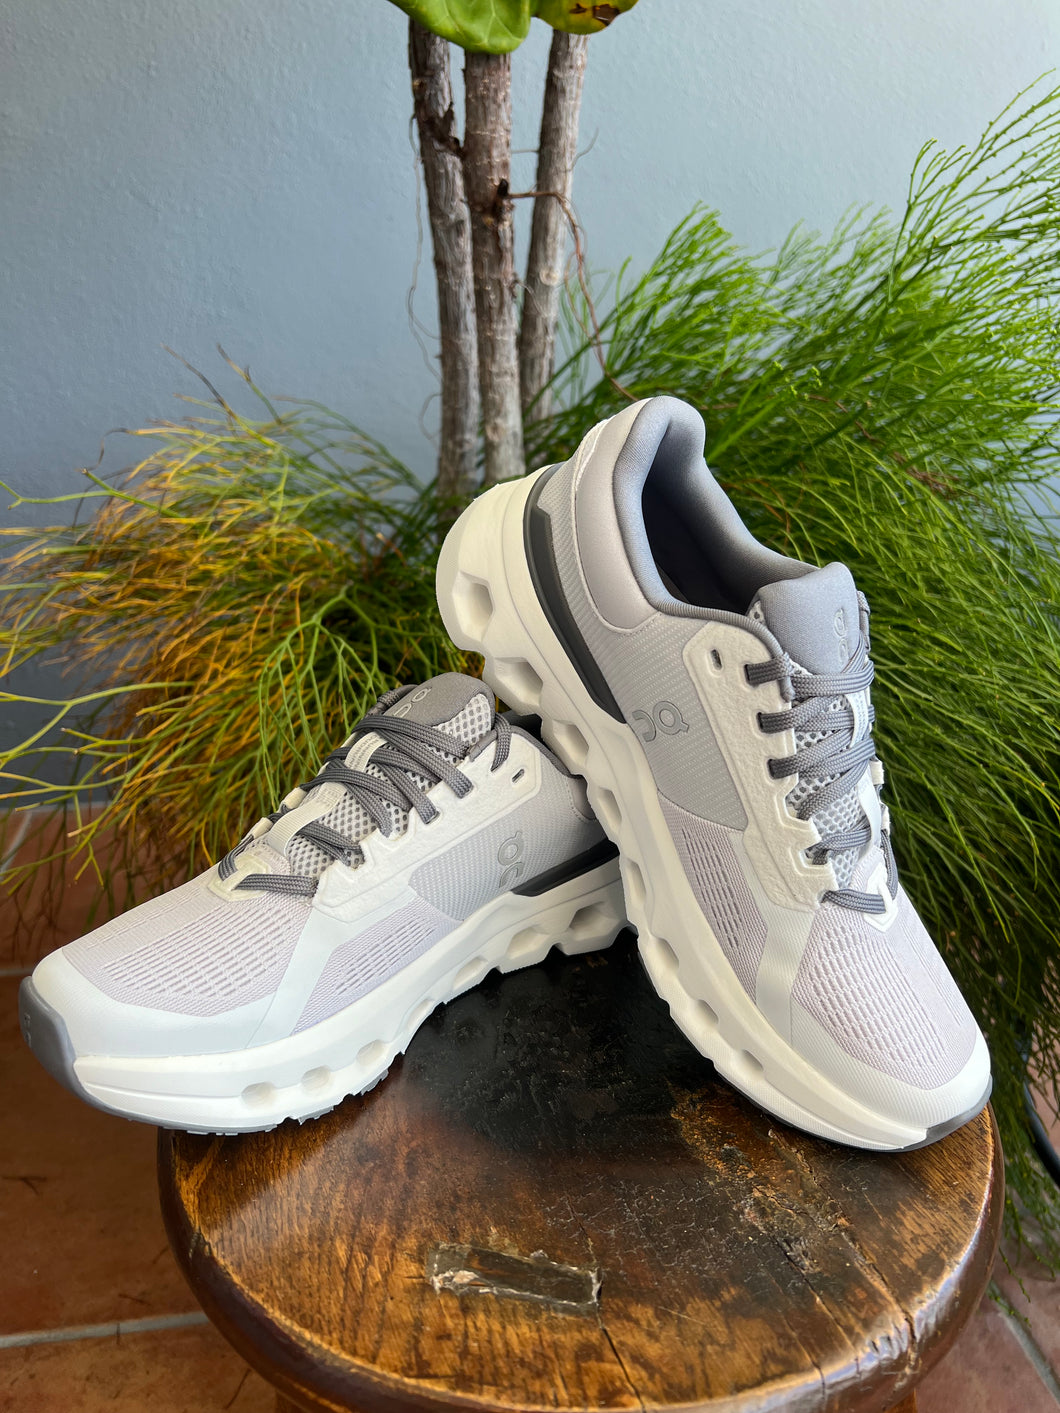 ladies cloudrunner 2 frost/white